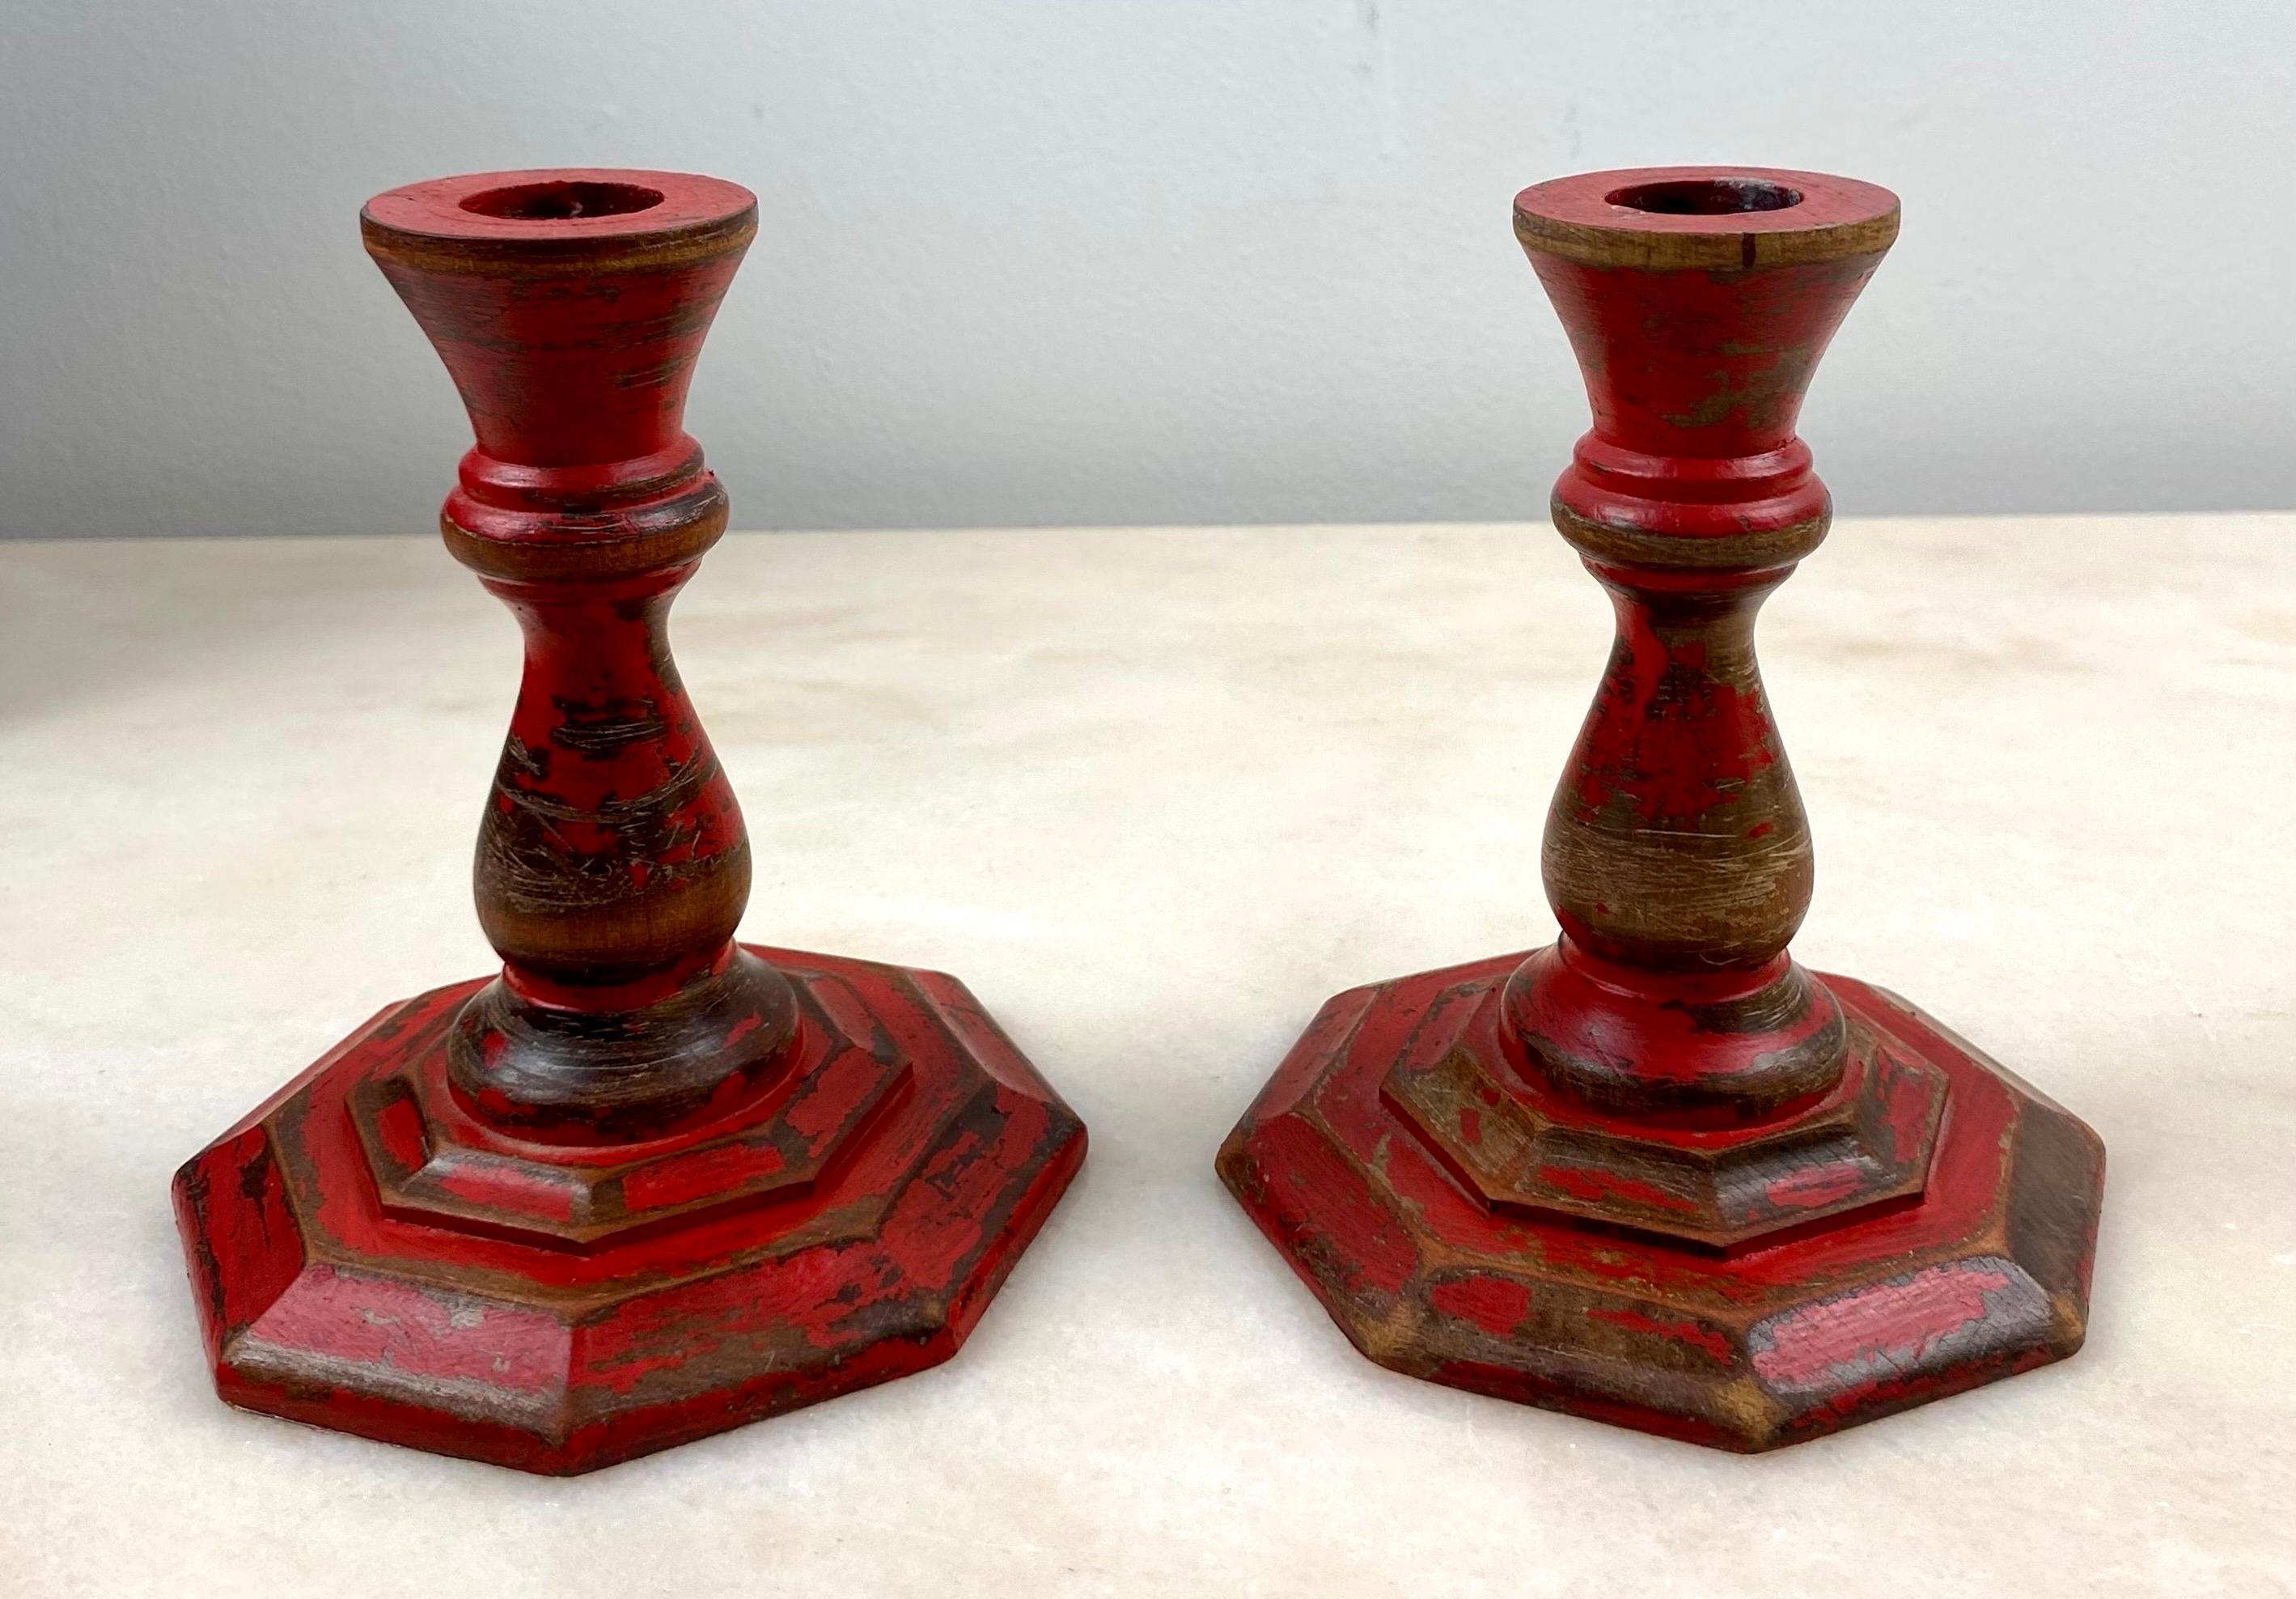 Charming Pair of 19th century wooden candlesticks turned with an old very worn red paint which gives them a very beautiful patina. The underside of the candlesticks is covered with marbled paper similar to an 18th century book binding paper and each